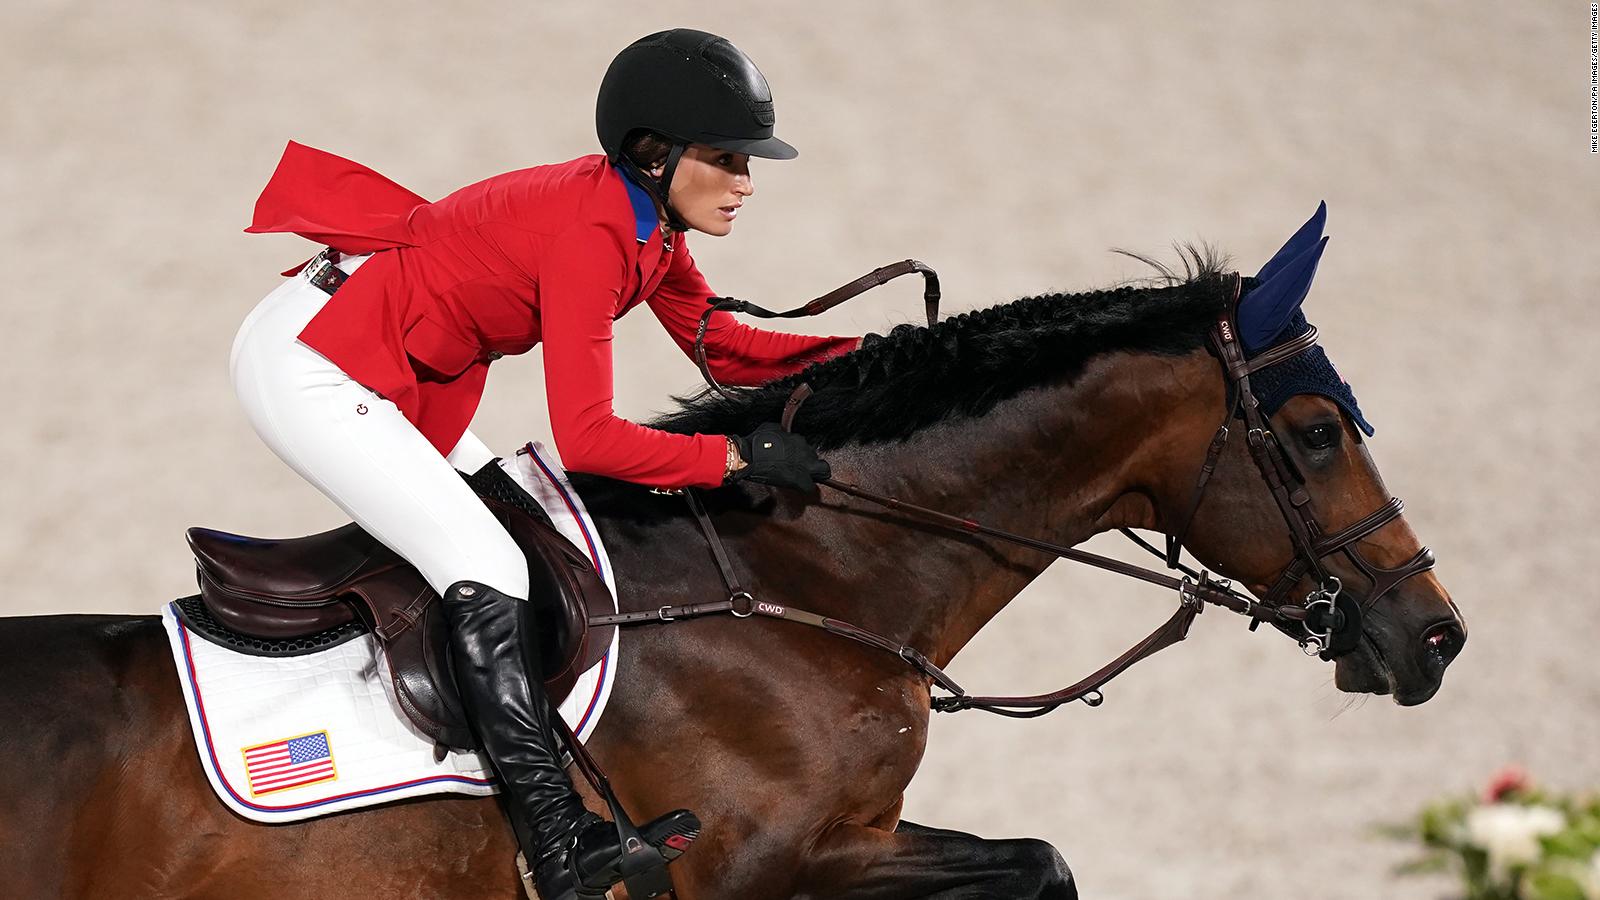 Jessica Springsteen, Bruce Springsteen's daughter, wins silver medal in